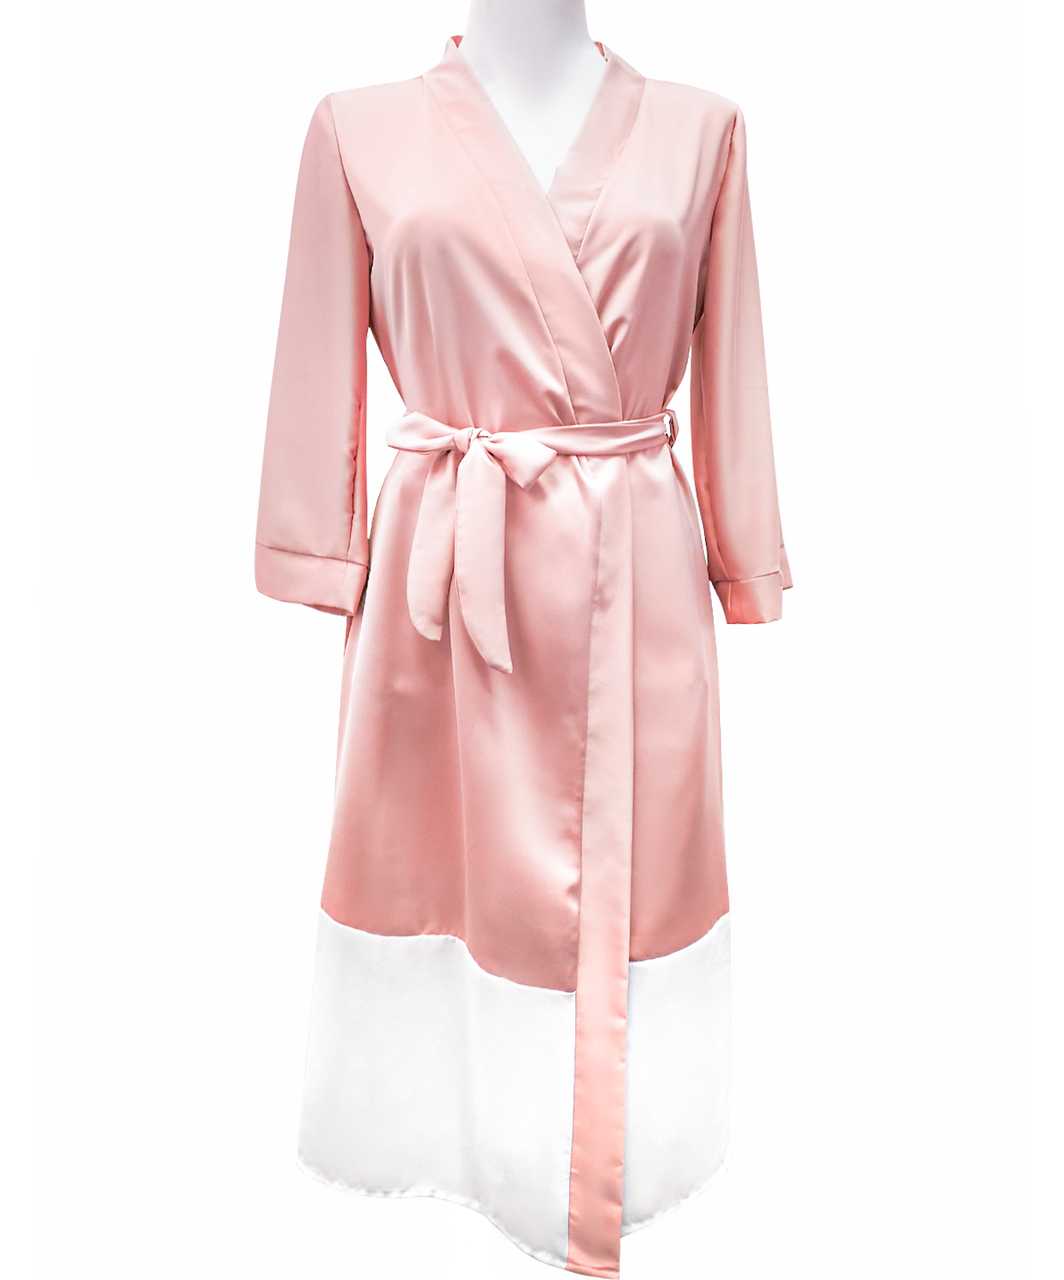 SexyStyle rose gold robe with white hemline